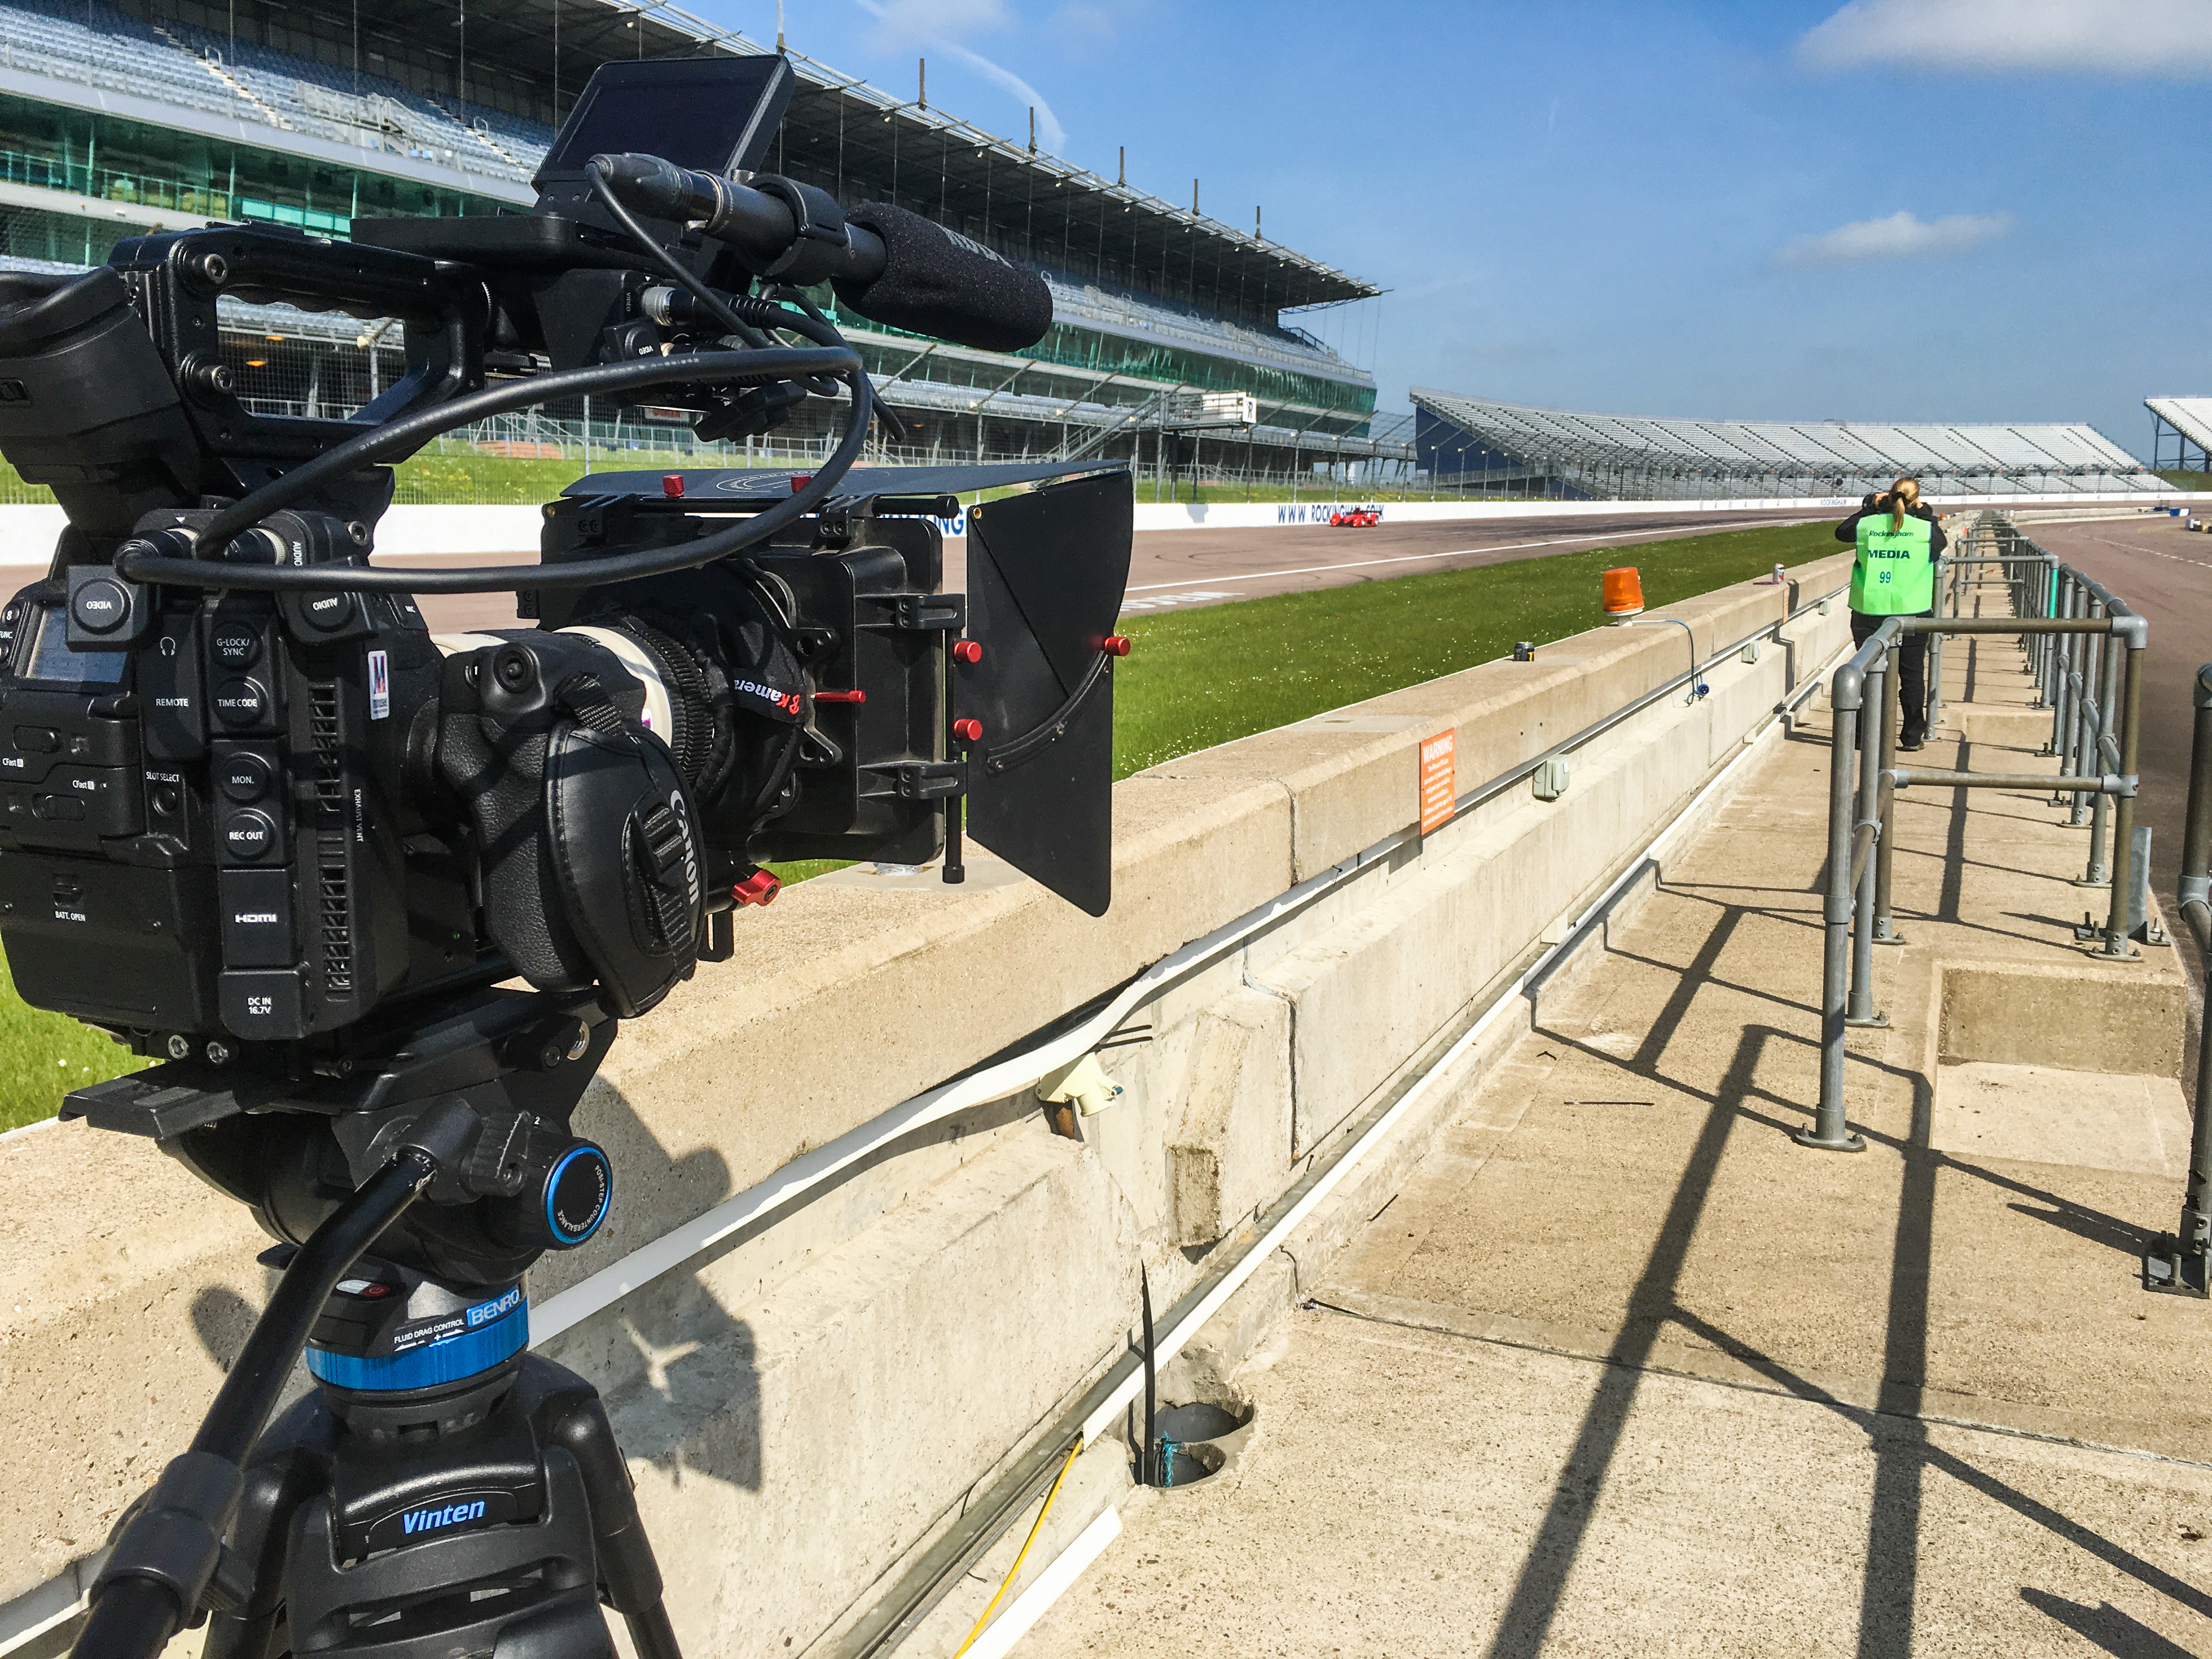 Our Canon C300 Mk2 out filming at Rockingham race circuit